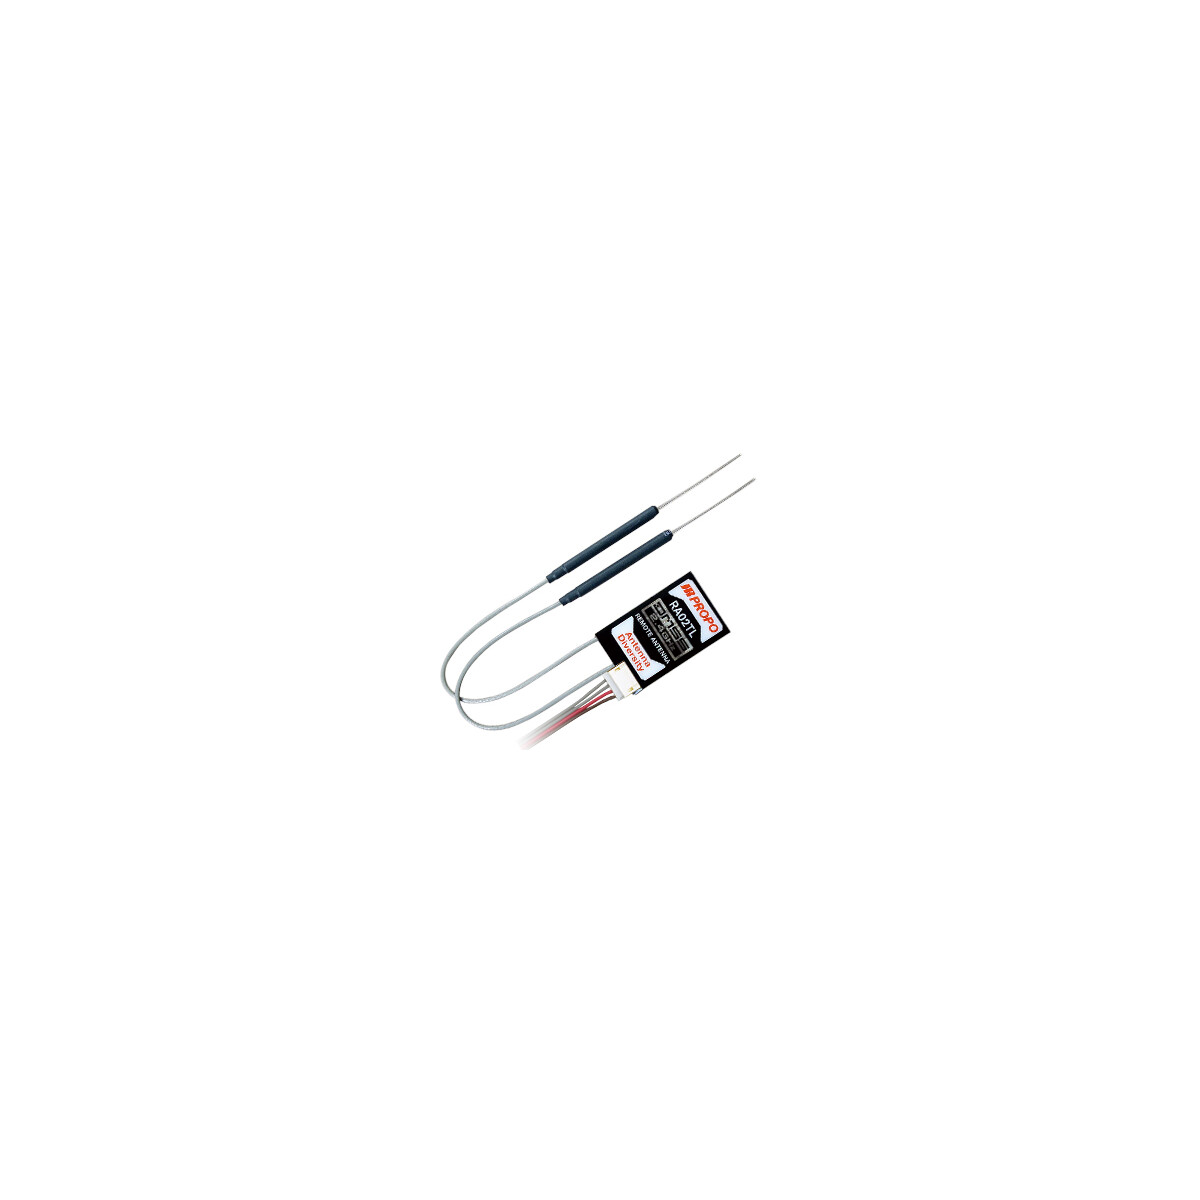 RA02TL DMSS Remote Antenna for 2.4GHz Receiver (Diversity...